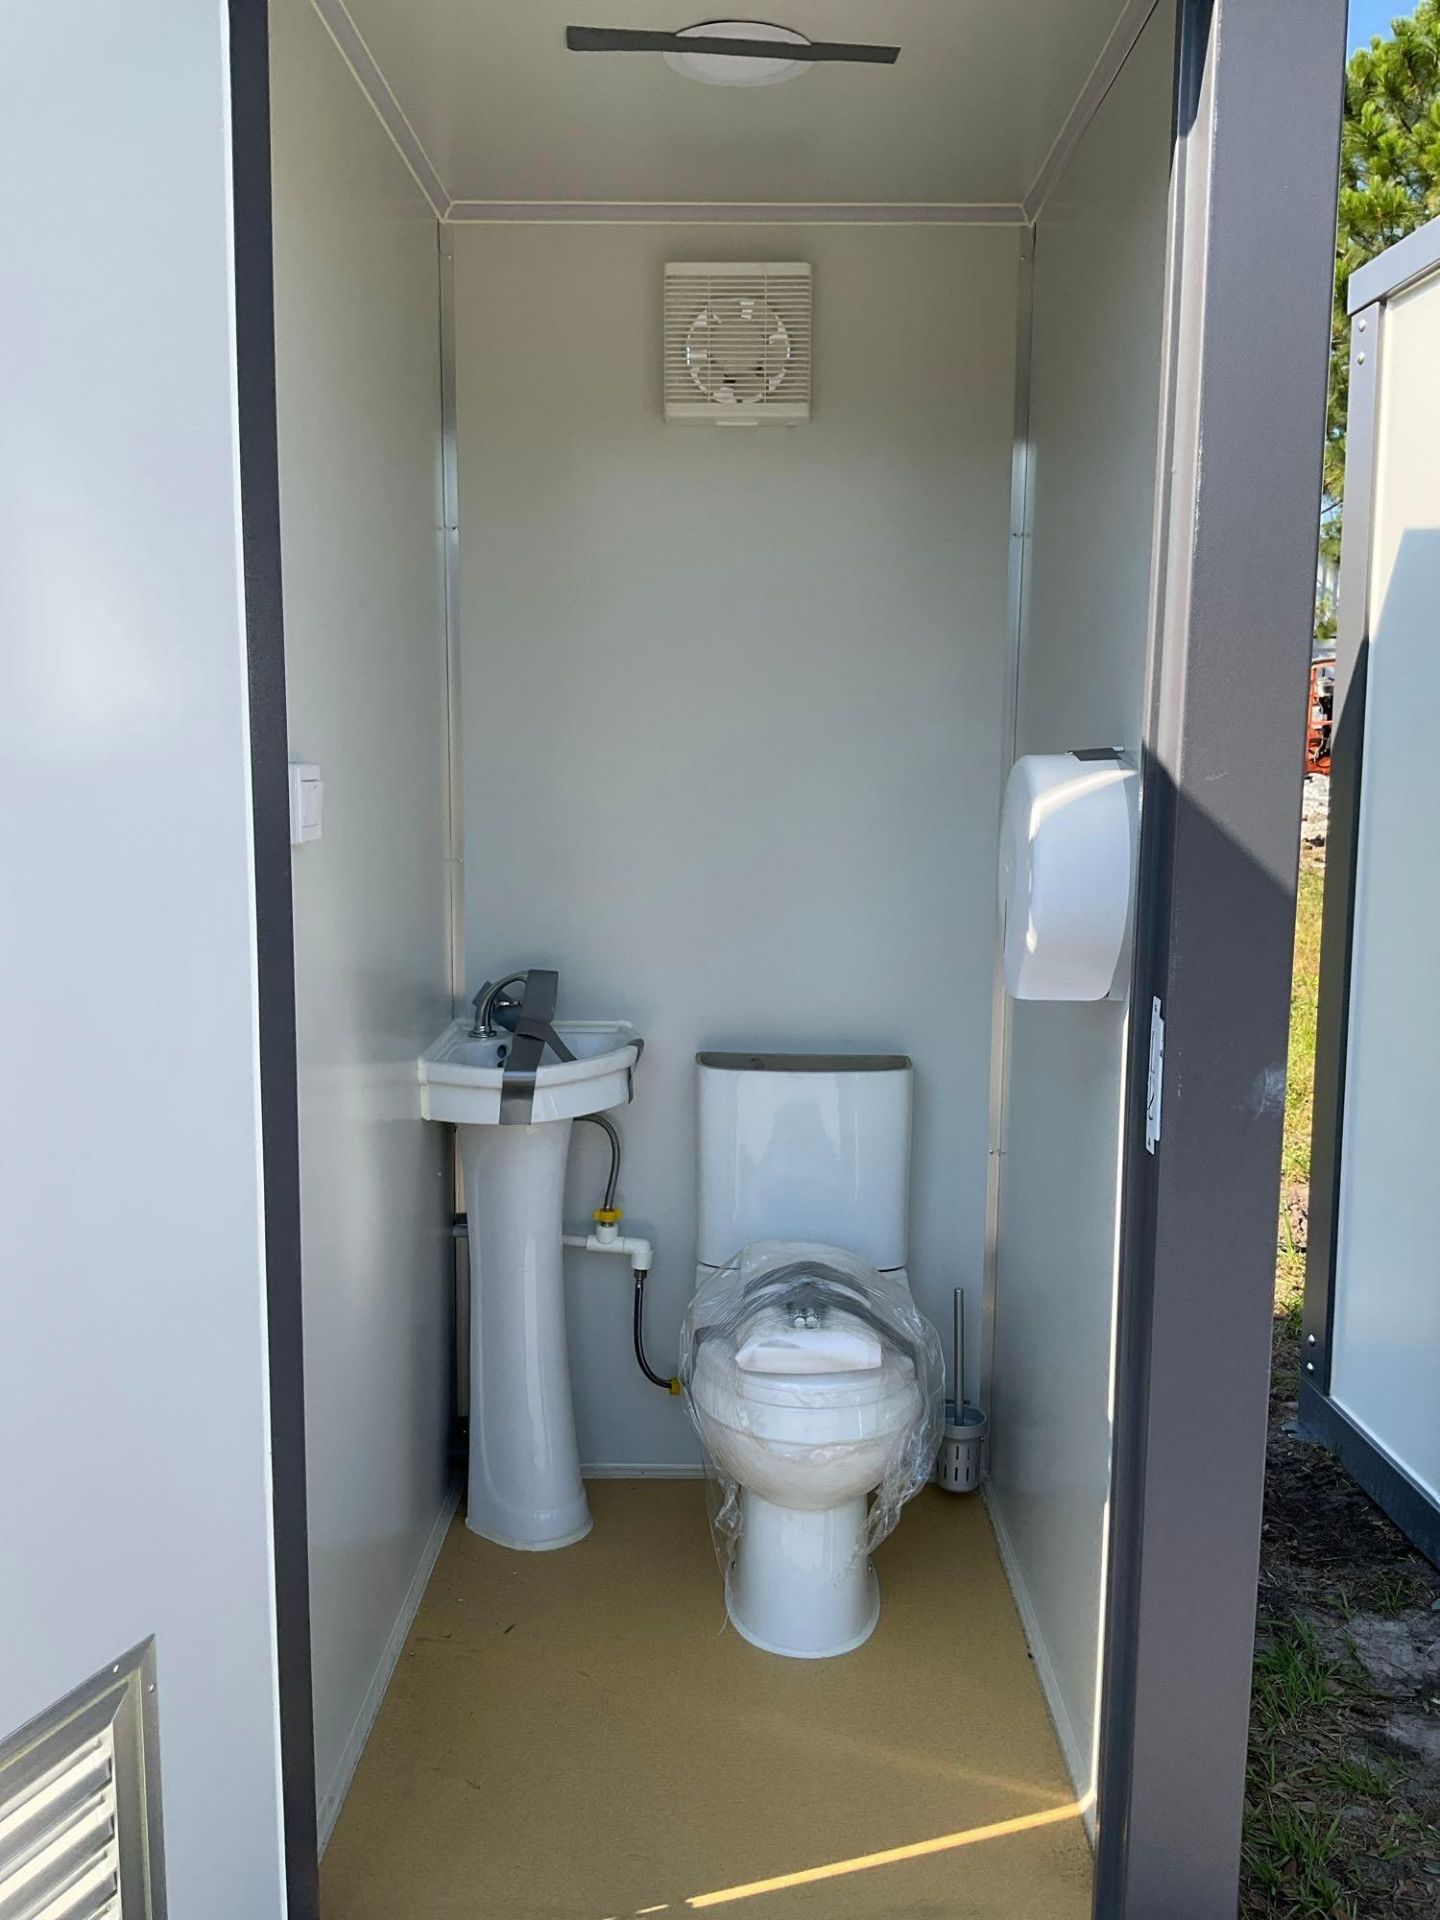 UNUSED PORTABLE DOUBLE BATHROOM UNIT, 2 STALLS, ELECTRIC & PLUMBING HOOK UP WITH EXTERIOR PLUMBING - Image 12 of 12